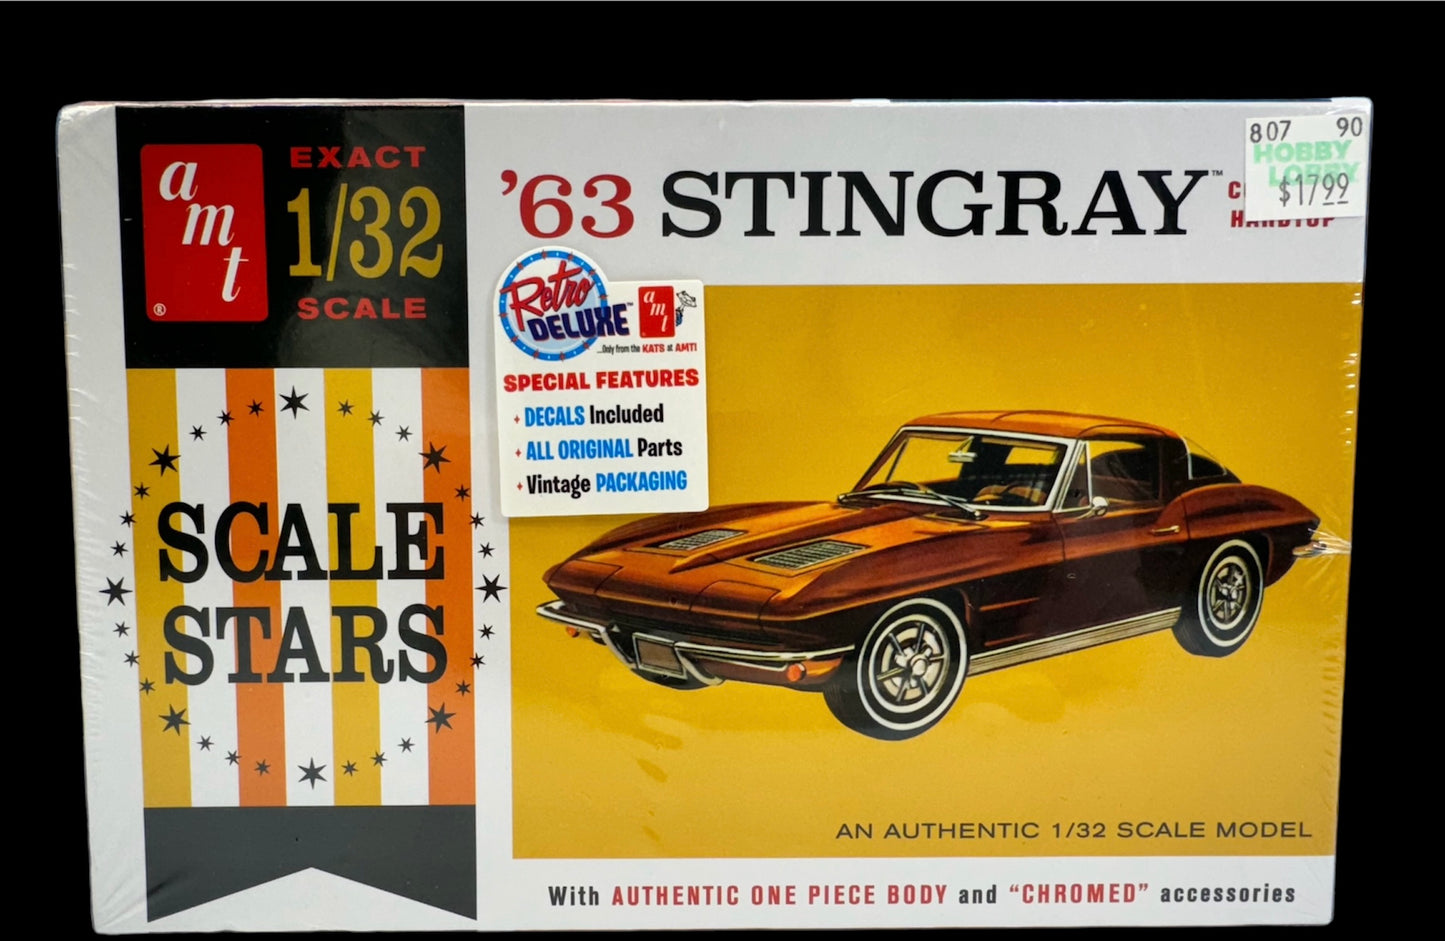 Collectors Lot of (5) 1963 Chevrolet Corvette Stingrays 1:24 All Factory Sealed